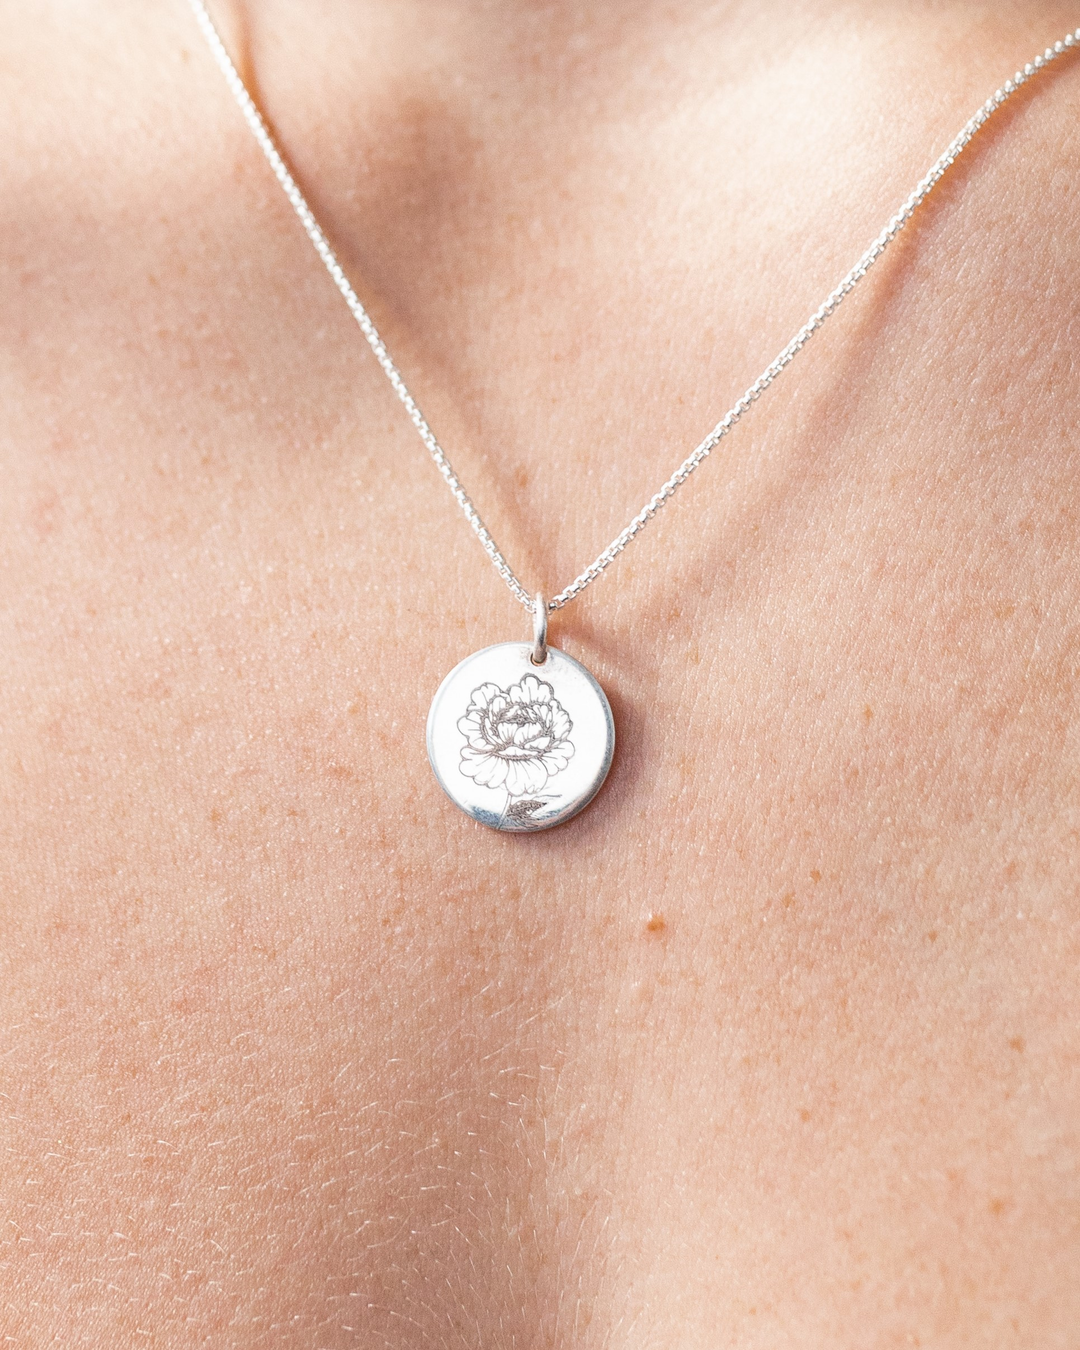 Close-up, front view of Close By Me's Circle Necklace with Birth Flower (Peony) Engraving in Sterling Silver, set against a solid white background.